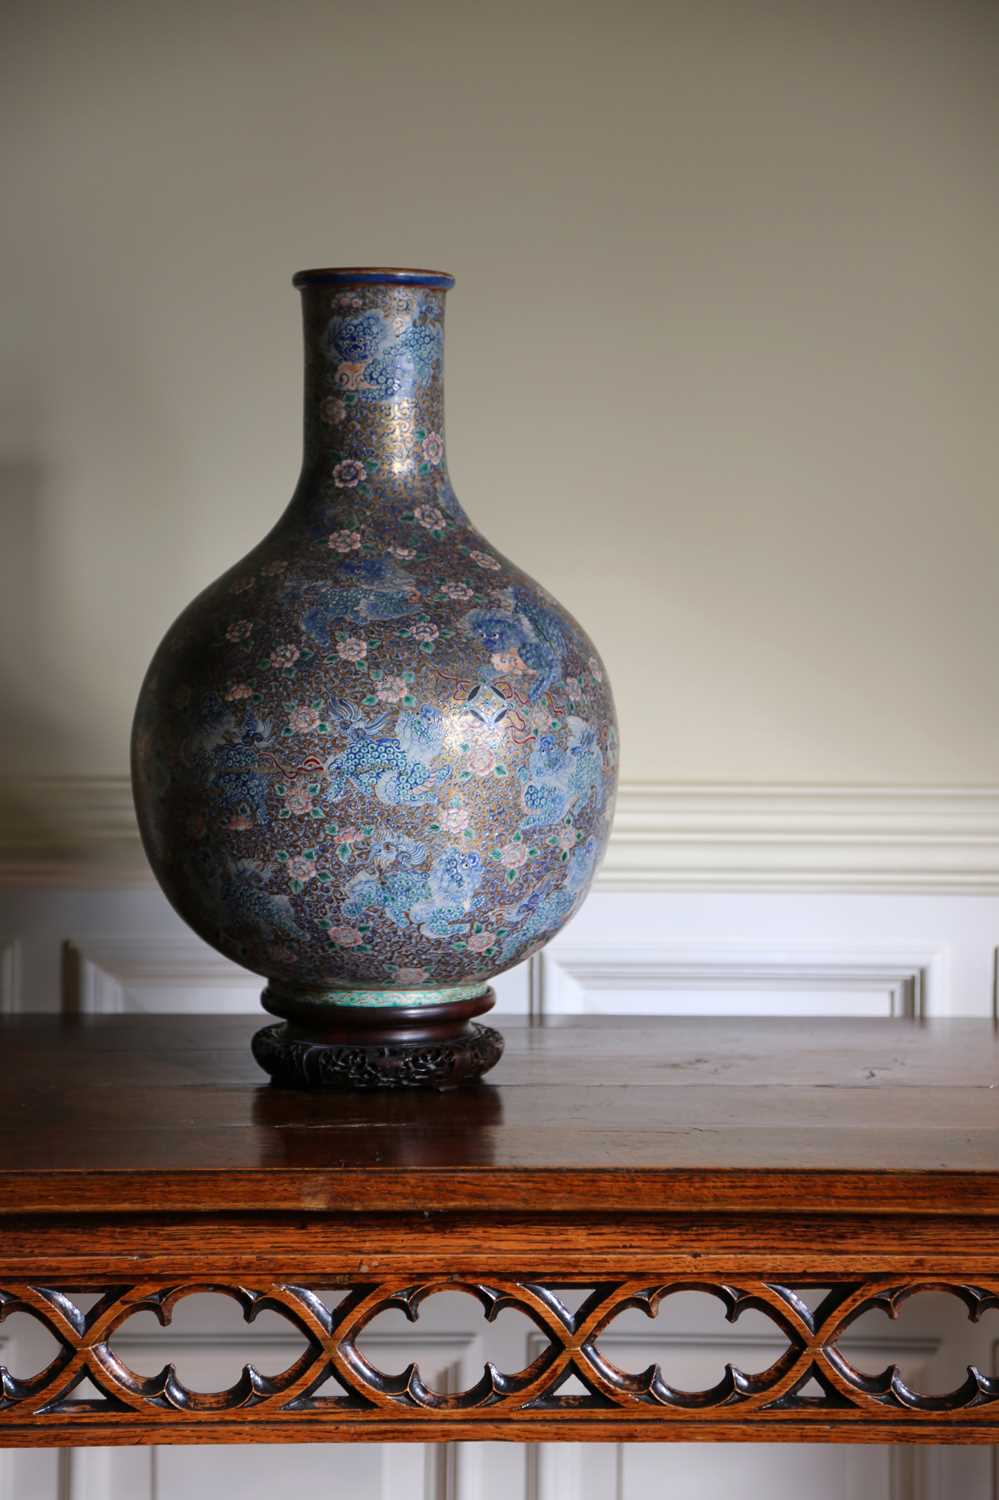 A JAPANESE SATSUMA POTTERY BOTTLE VASE MEIJI PERIOD, LATE 19TH / EARLY 20TH CENTURY enamelled with